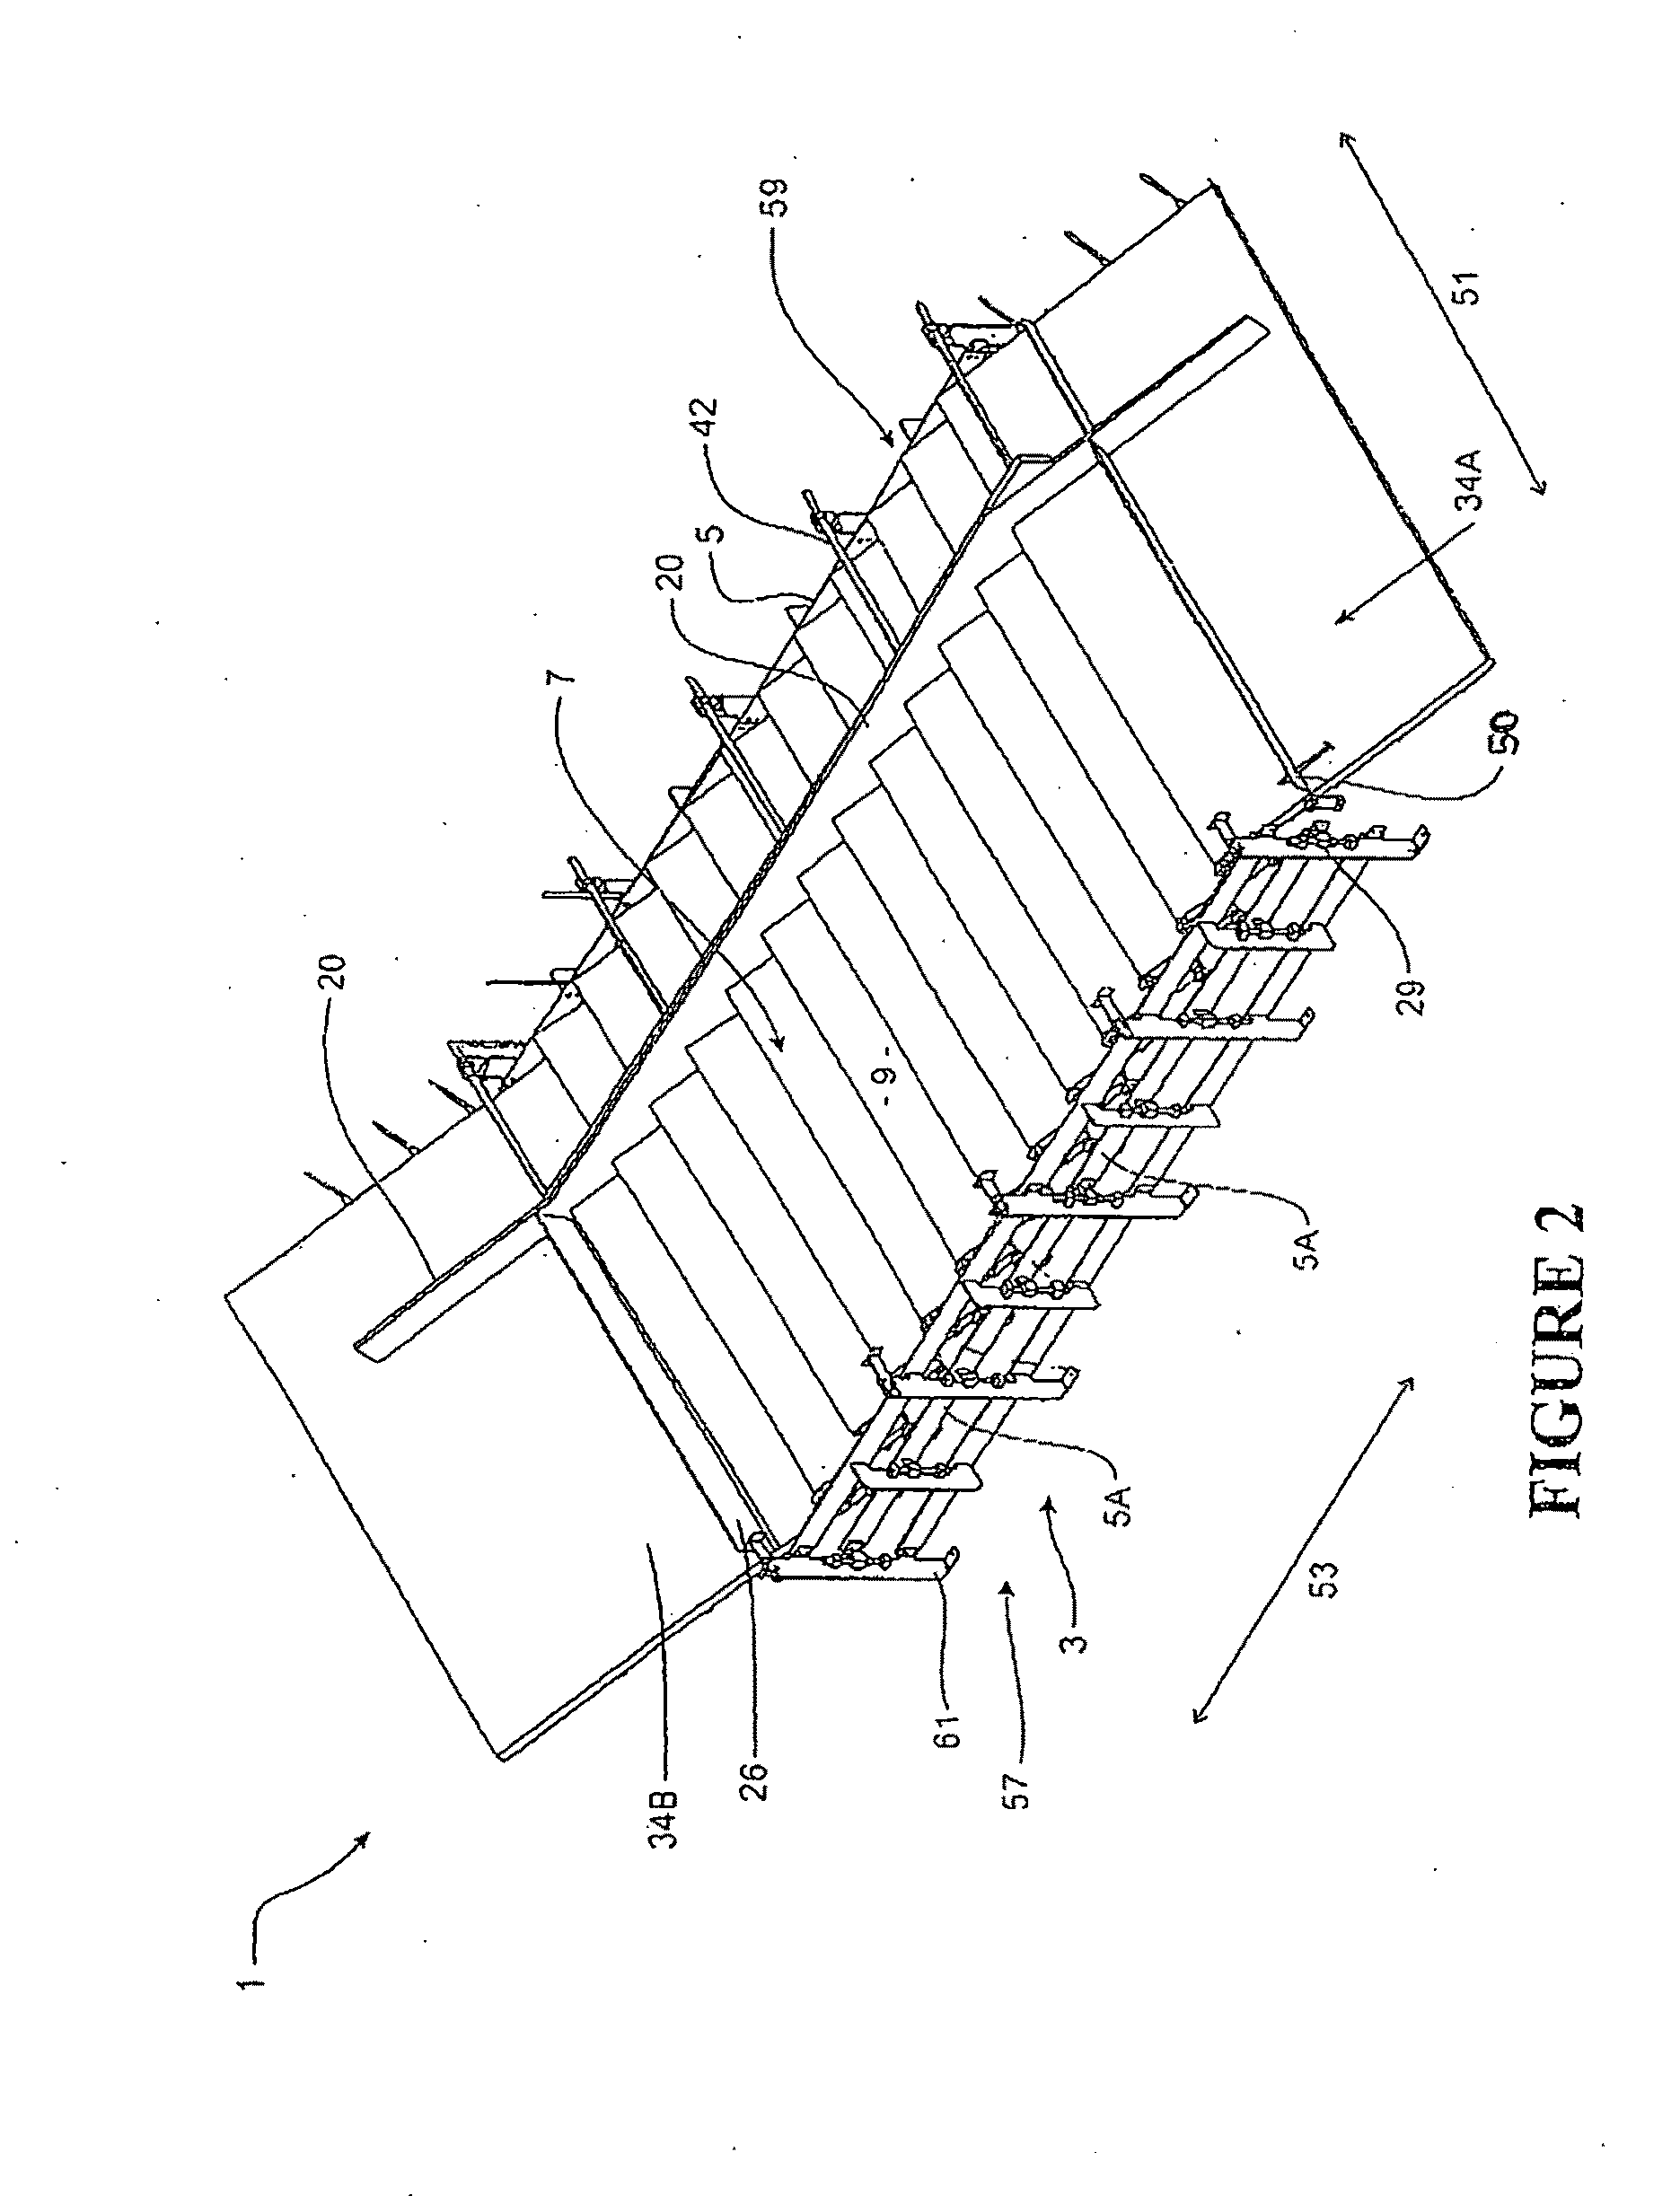 Stair forming apparatus and related methods